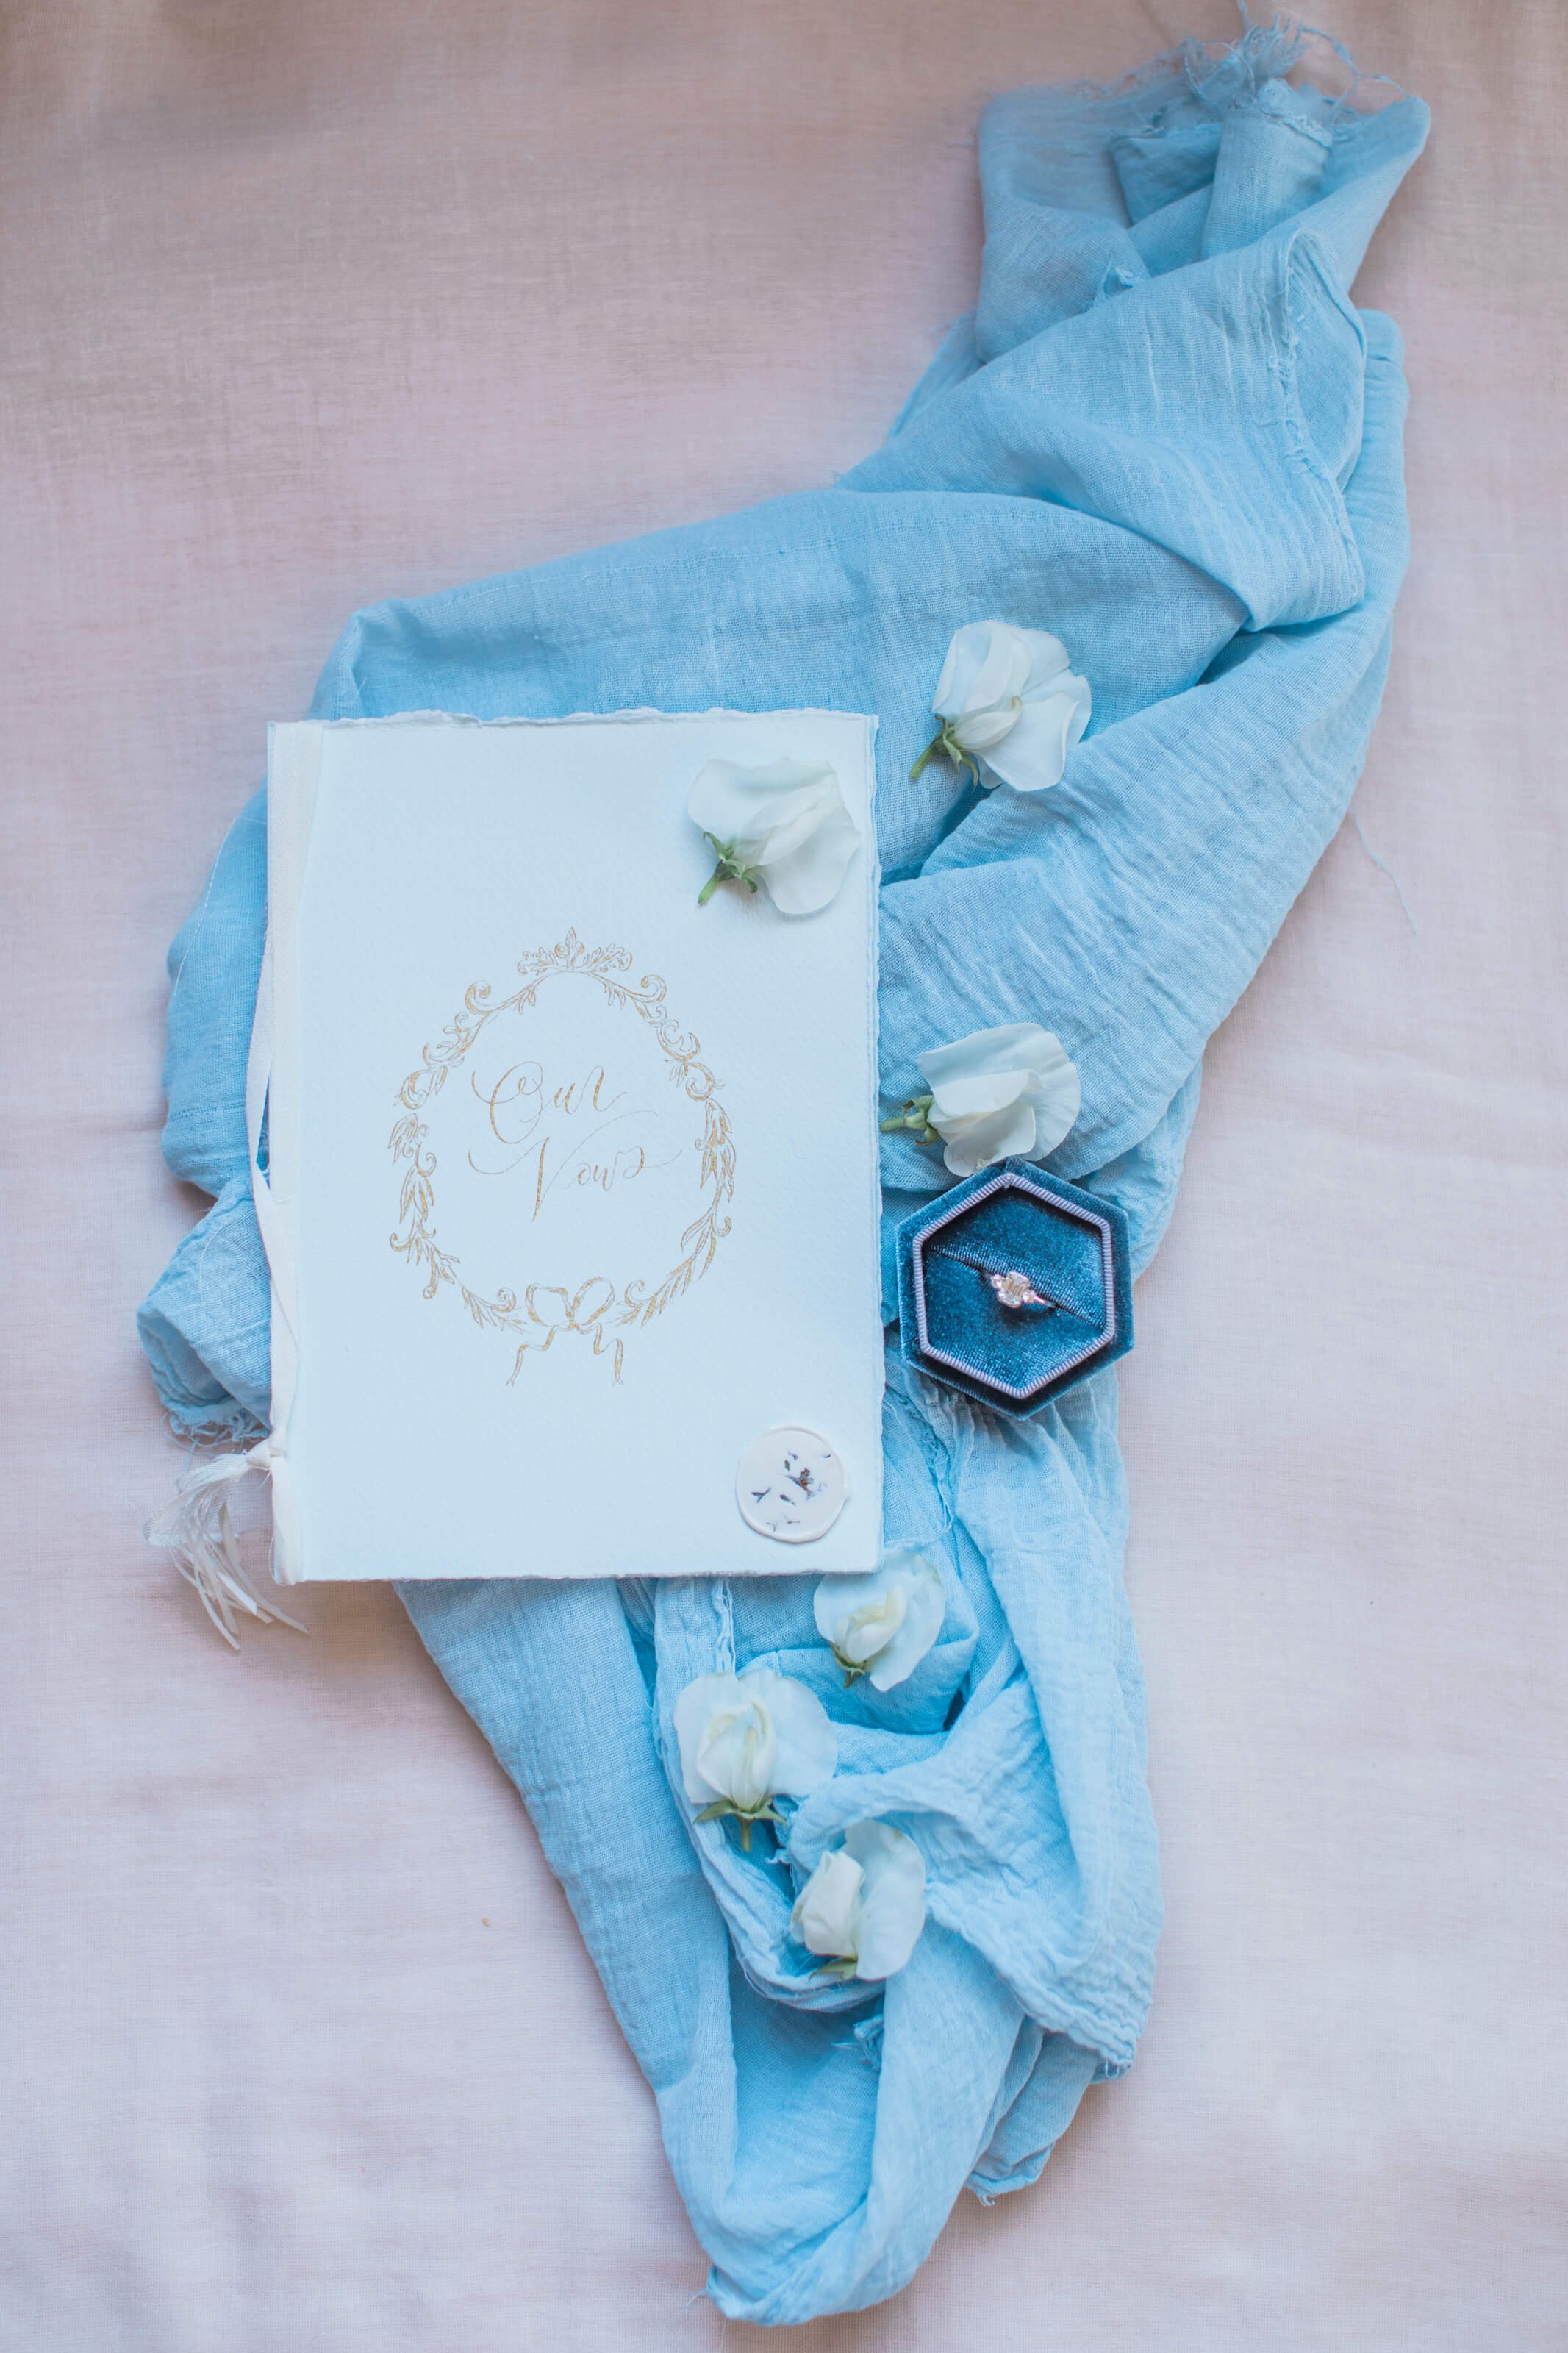 Hand drawn wreath and calligraphy vow book